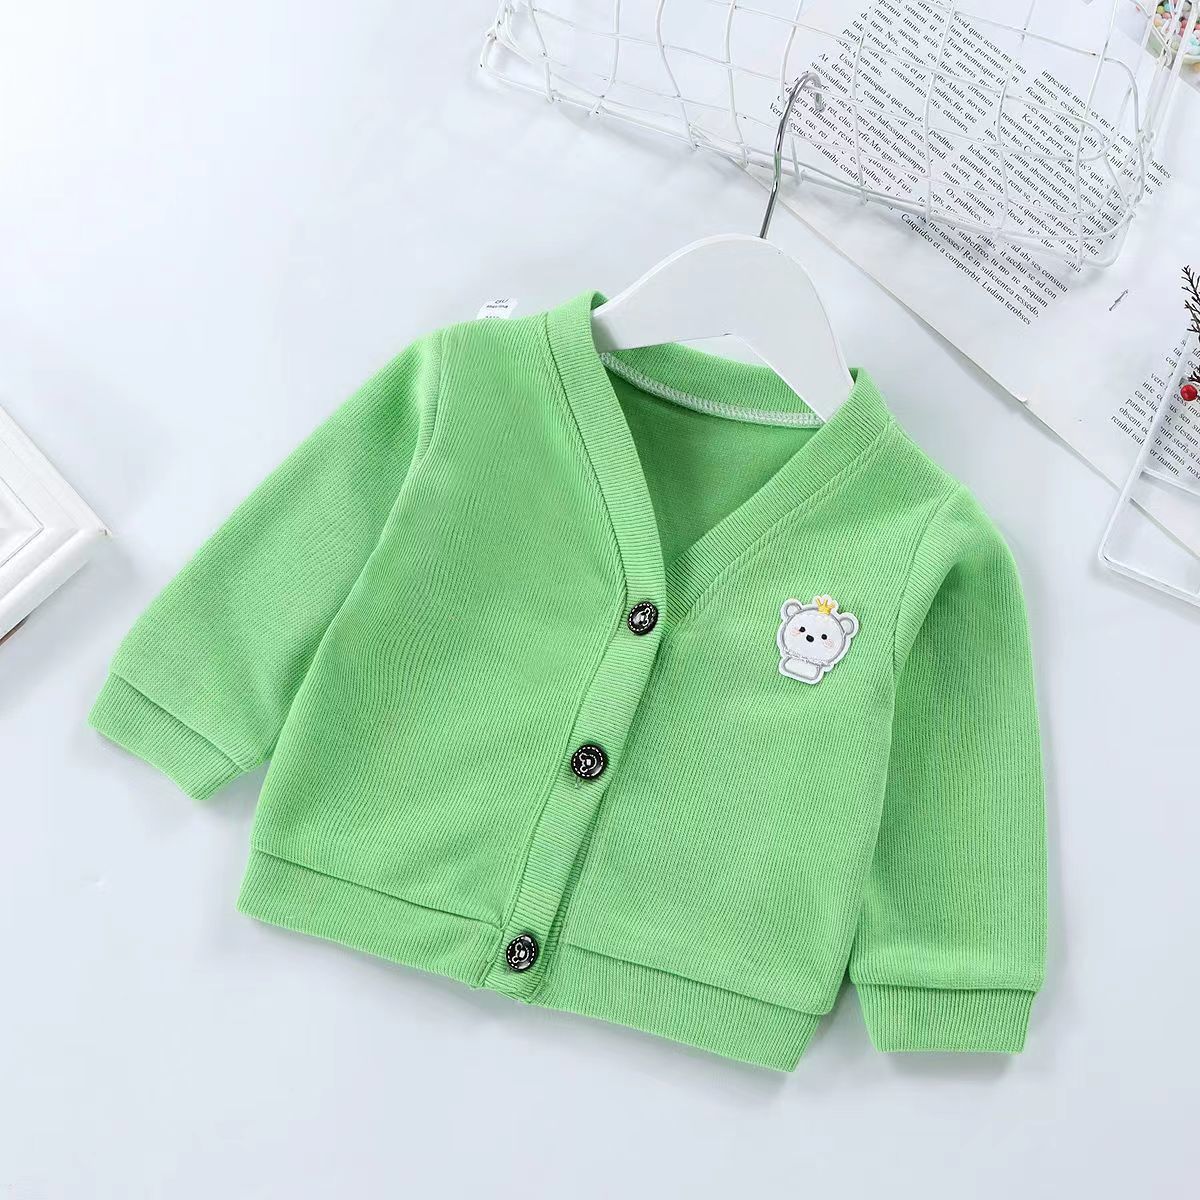 Children's jacket baby V-neck sweater boys and girls spring and autumn long-sleeved jacket single top baby knitted cardigan